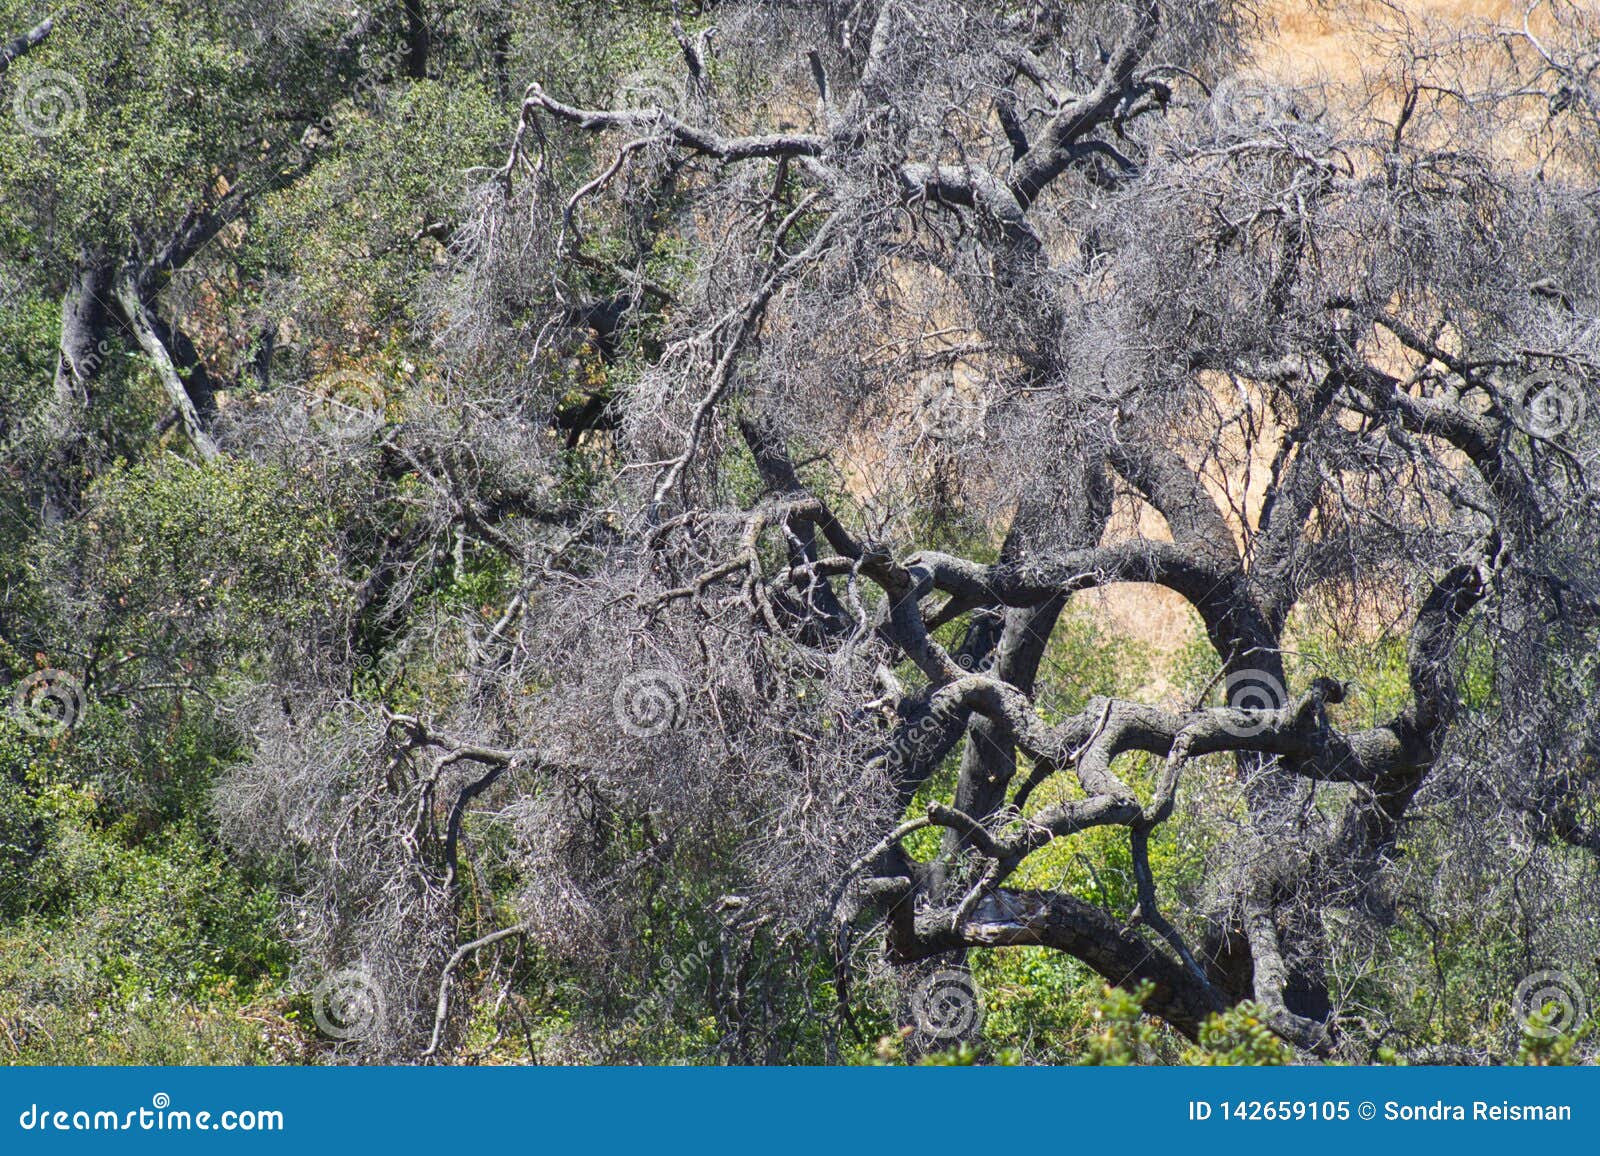 A sea of Branches stock image. Image of trunks, trees - 142659105